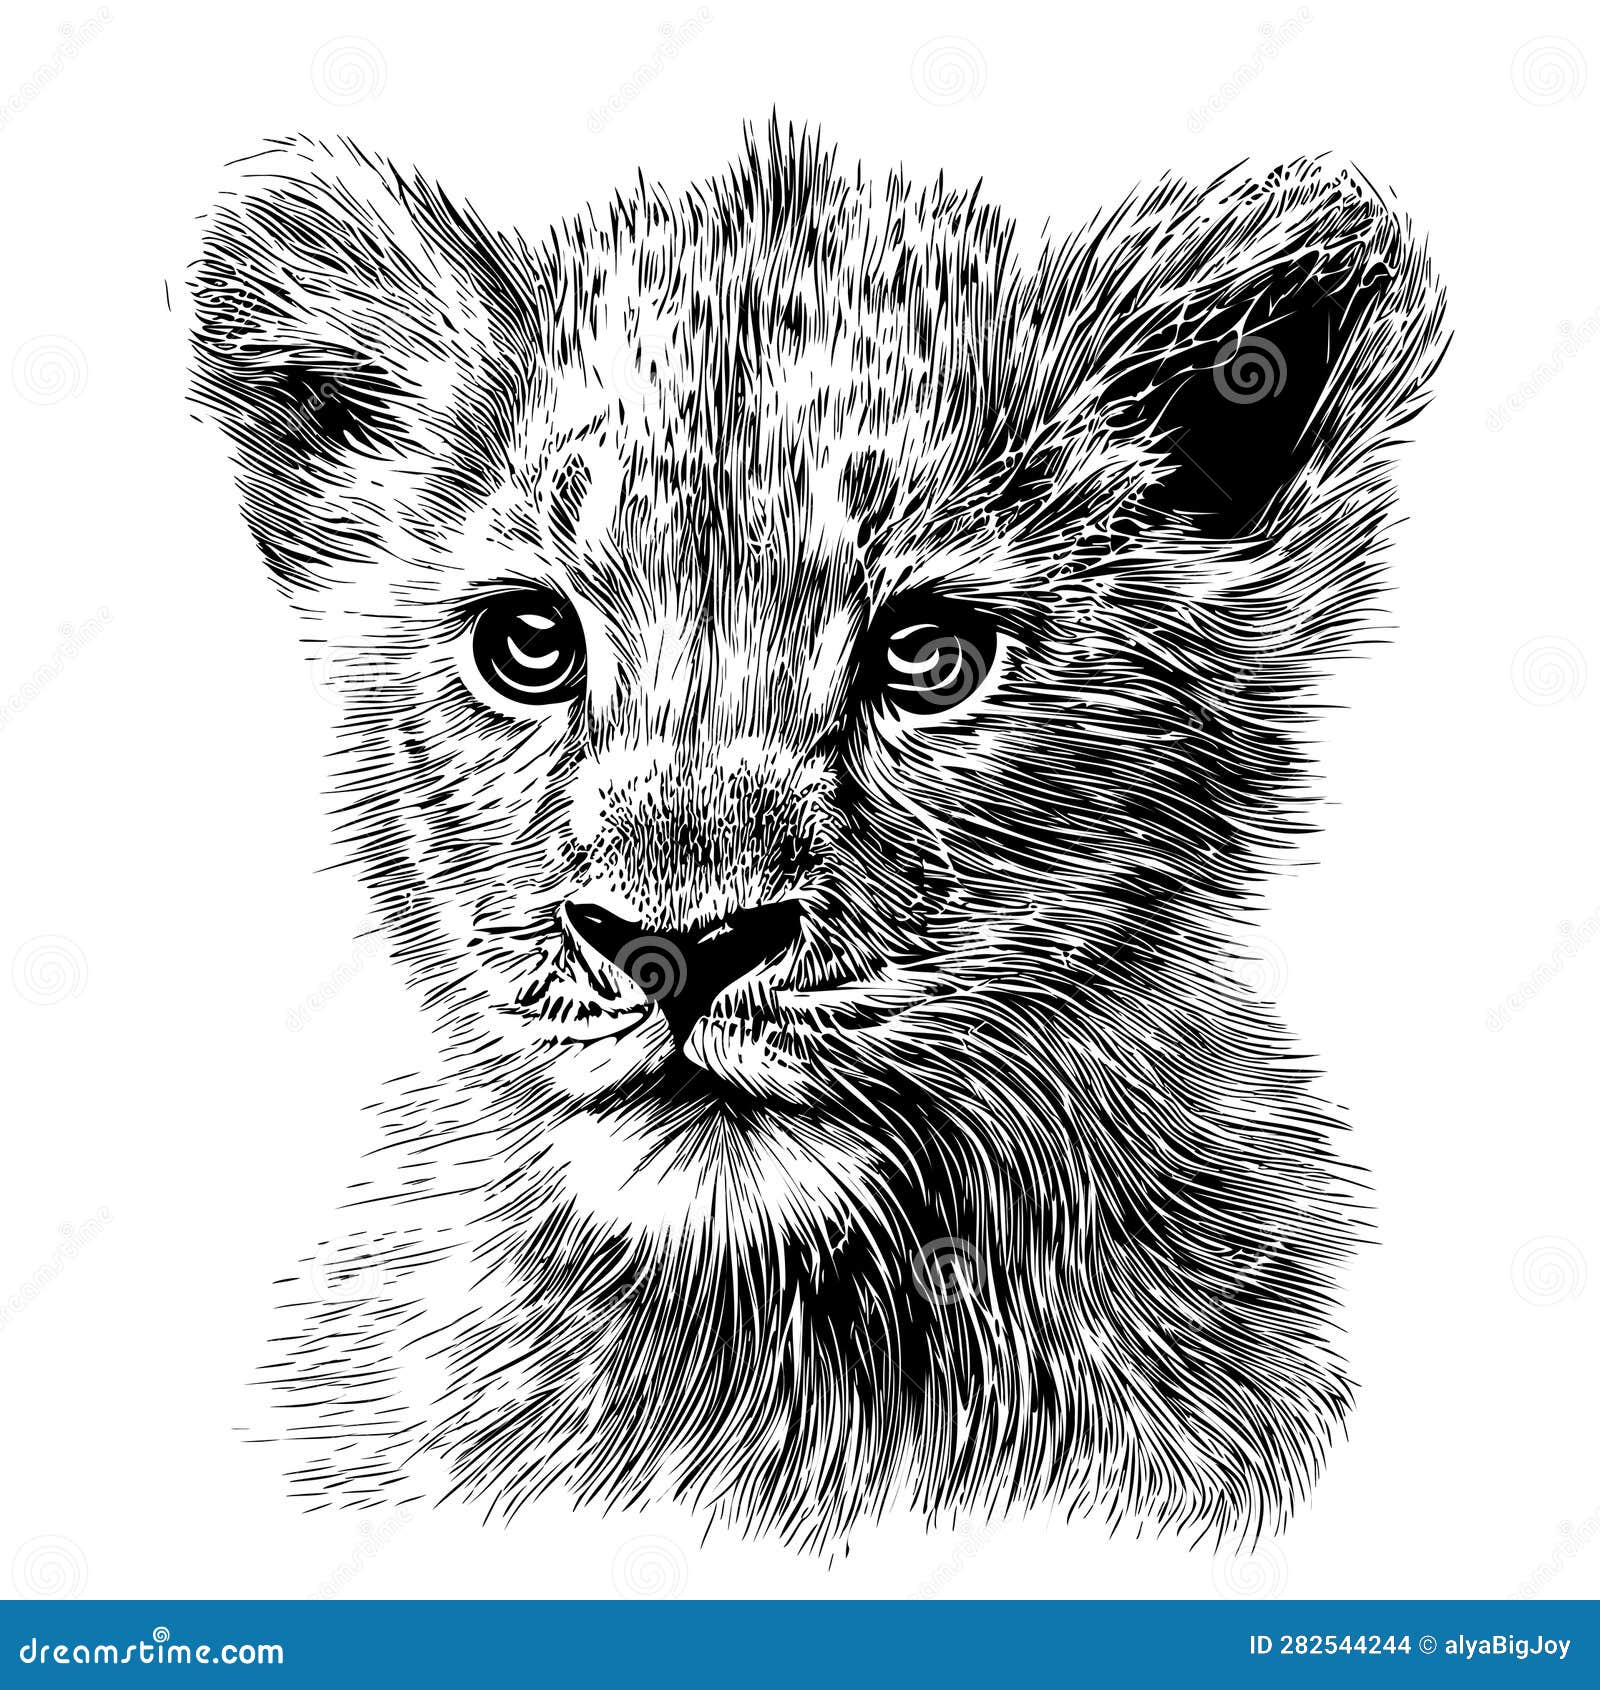 Lion Cub. Animals. Drawings. Pictures. Drawings ideas for kids. Easy and  simple.